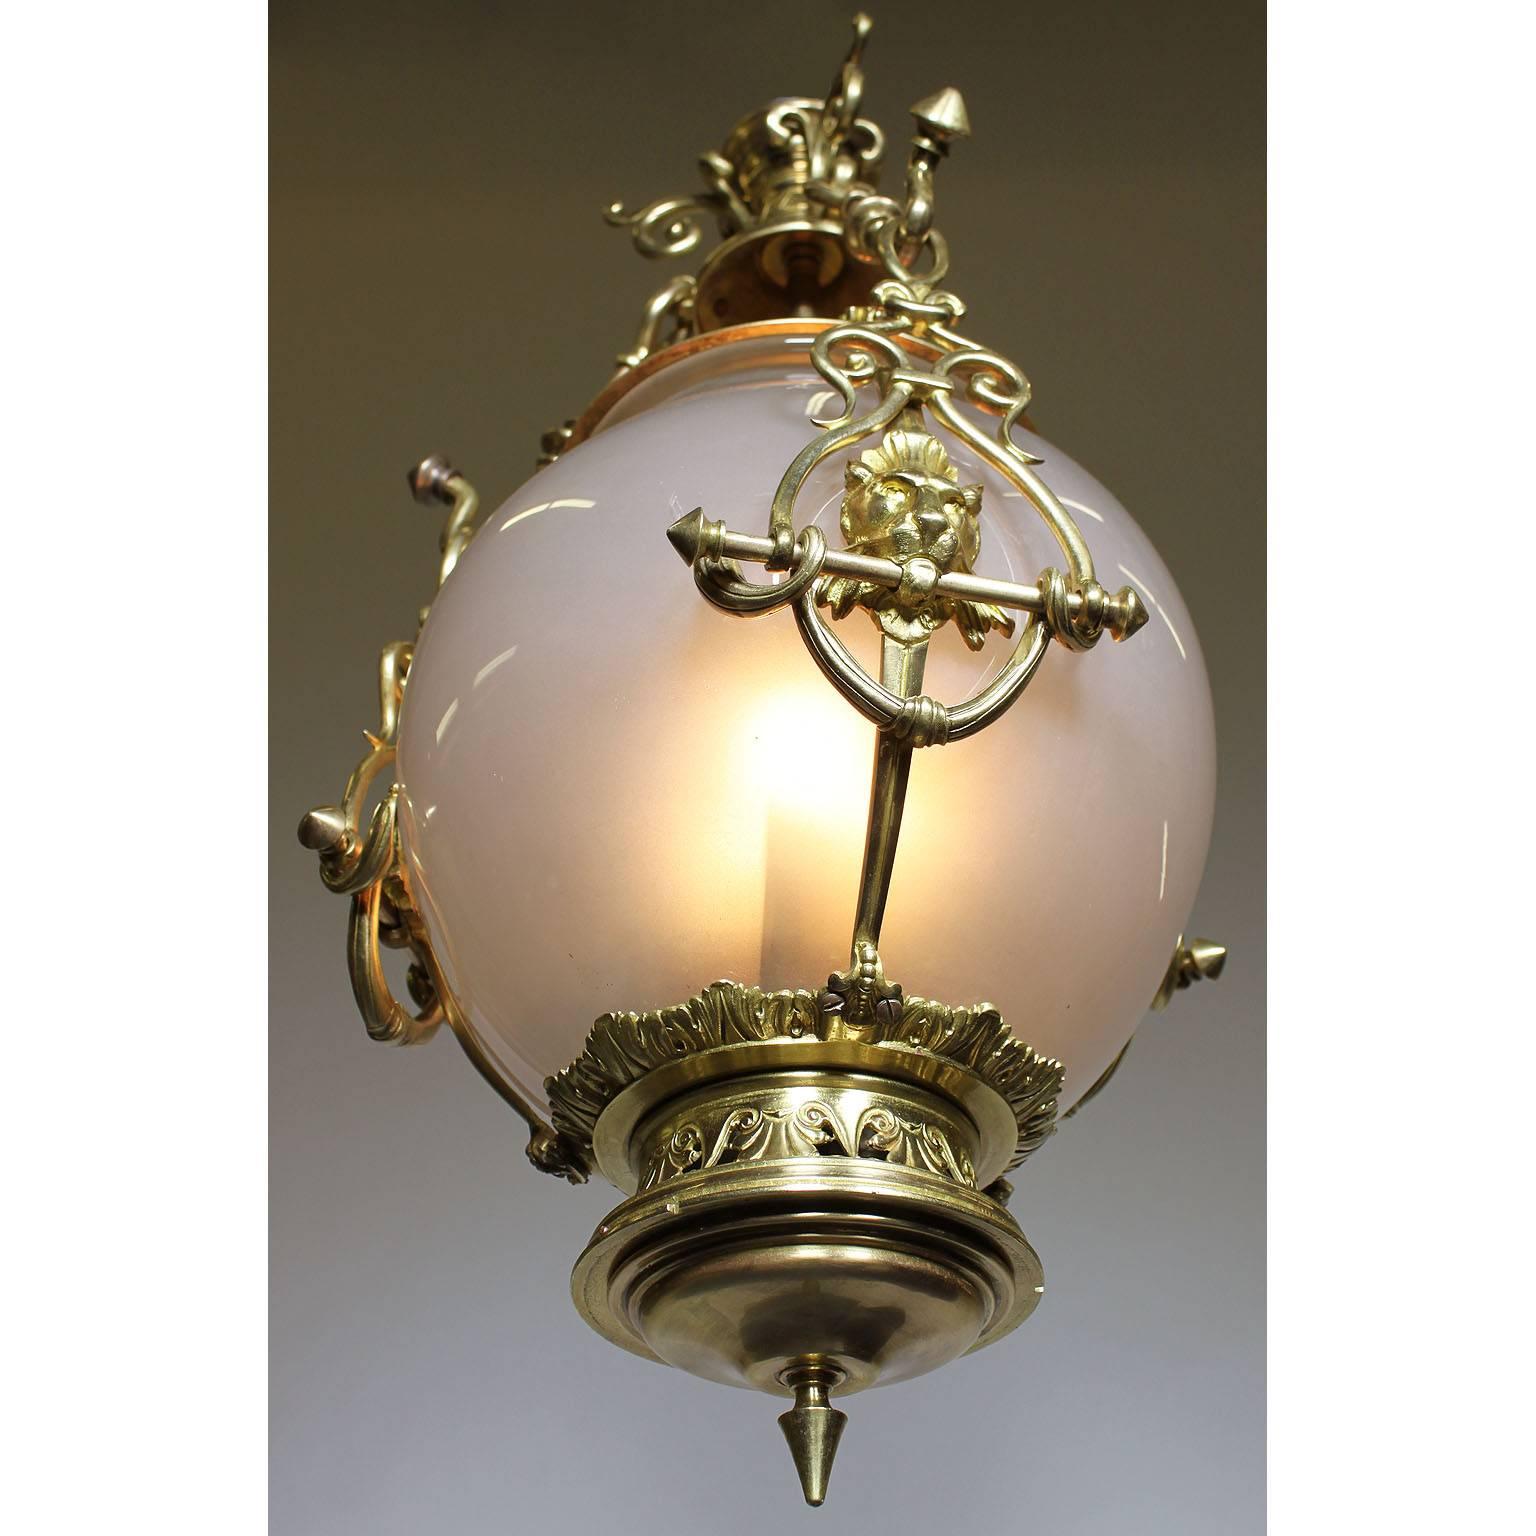 European Early 20th Century Gilt-Bronze and Opaline Glass Hanging Lantern with Lion Pelts For Sale